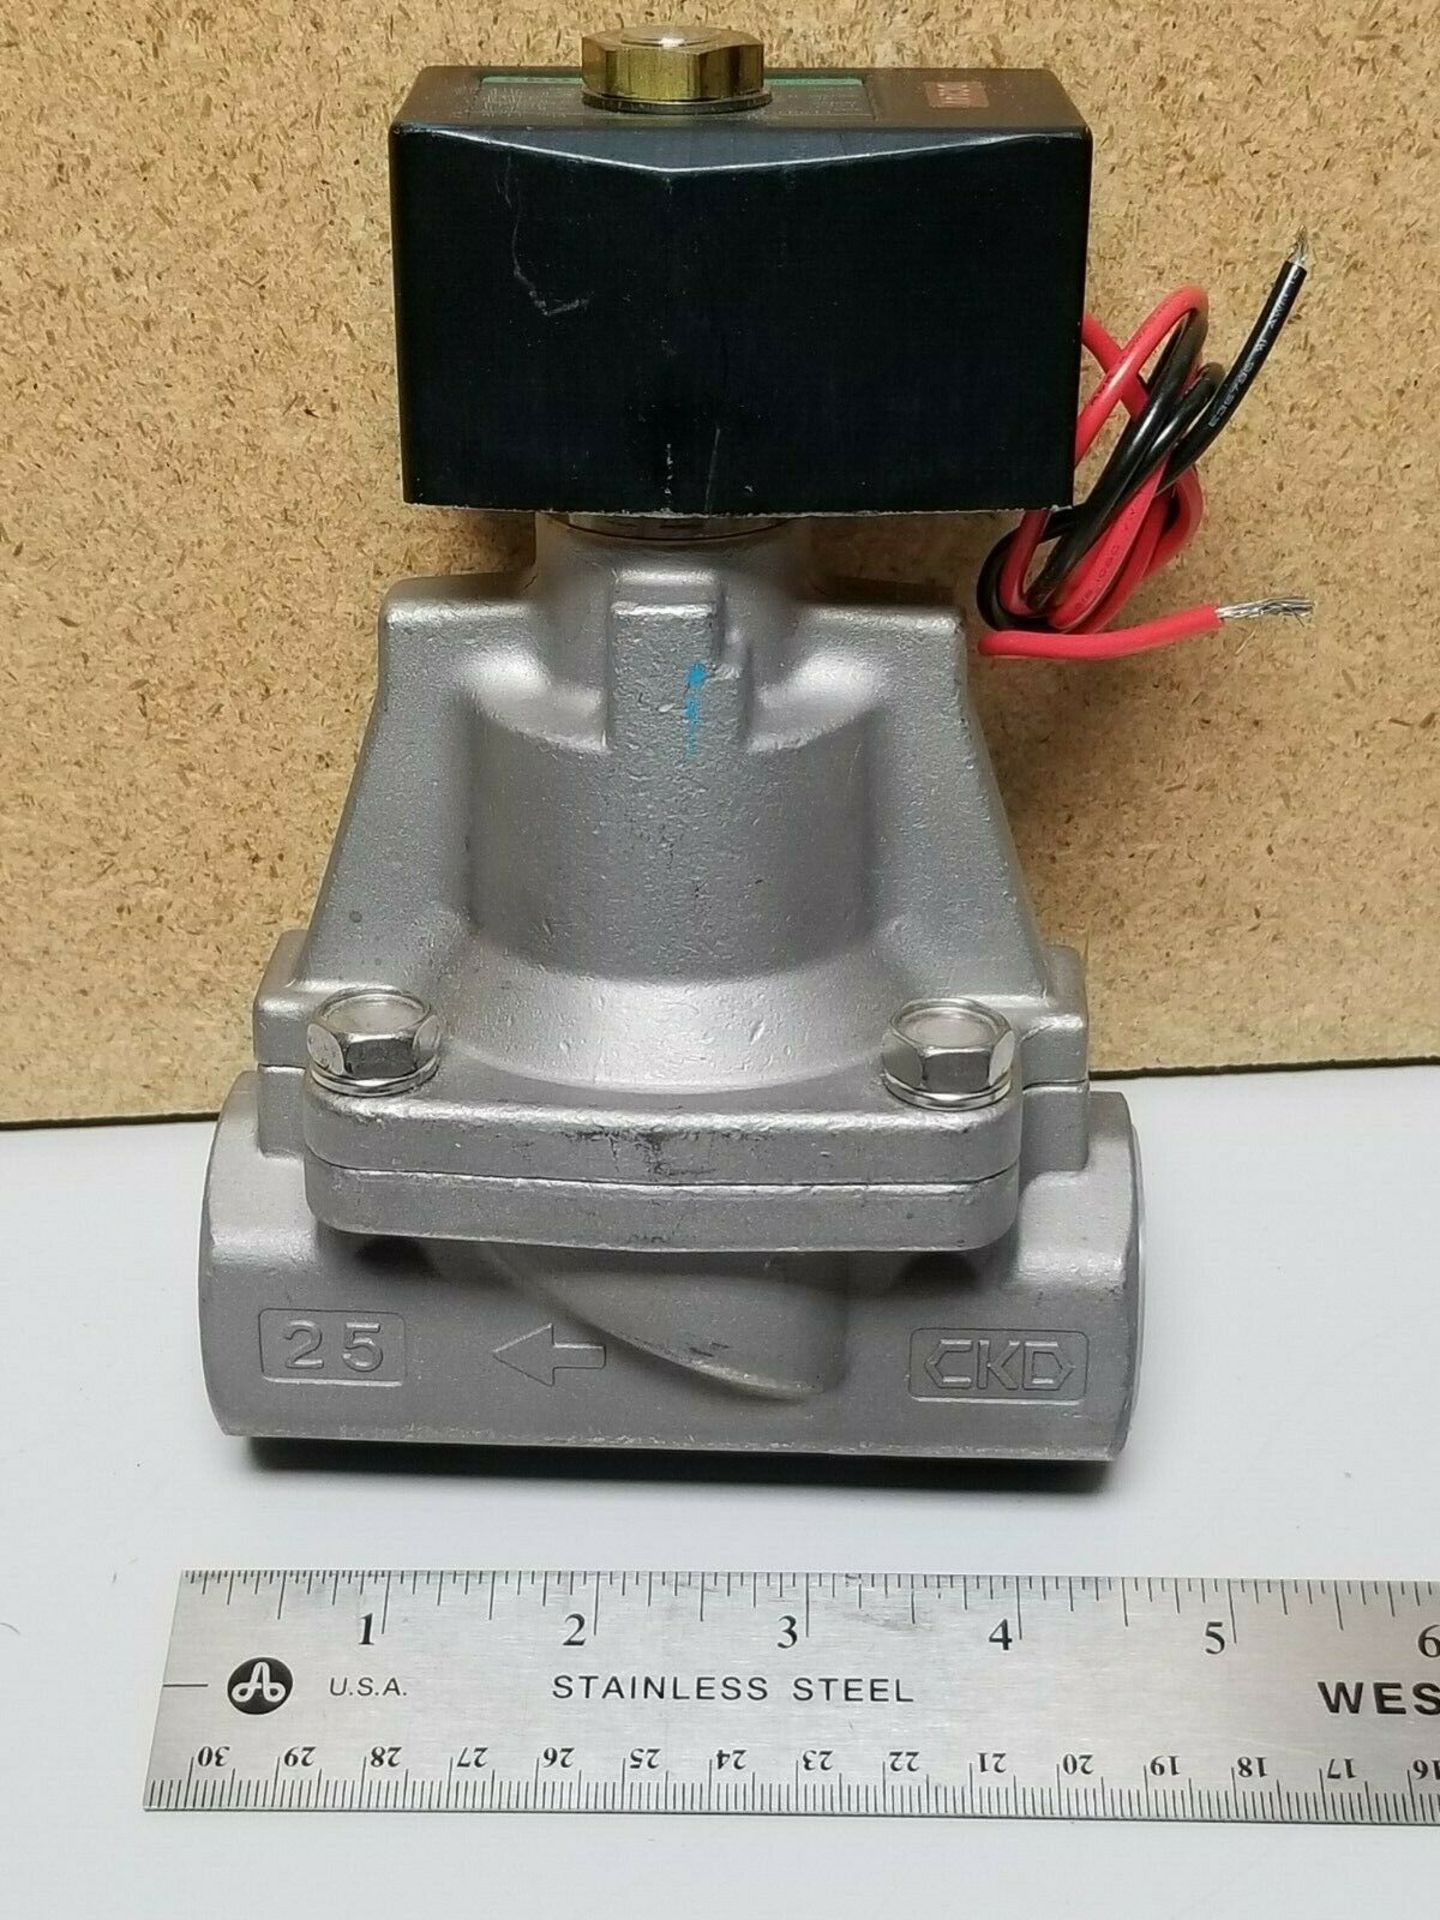 NEW CKD STAINLESS STEEL PILOT OPERATED SOLENOID VALVE